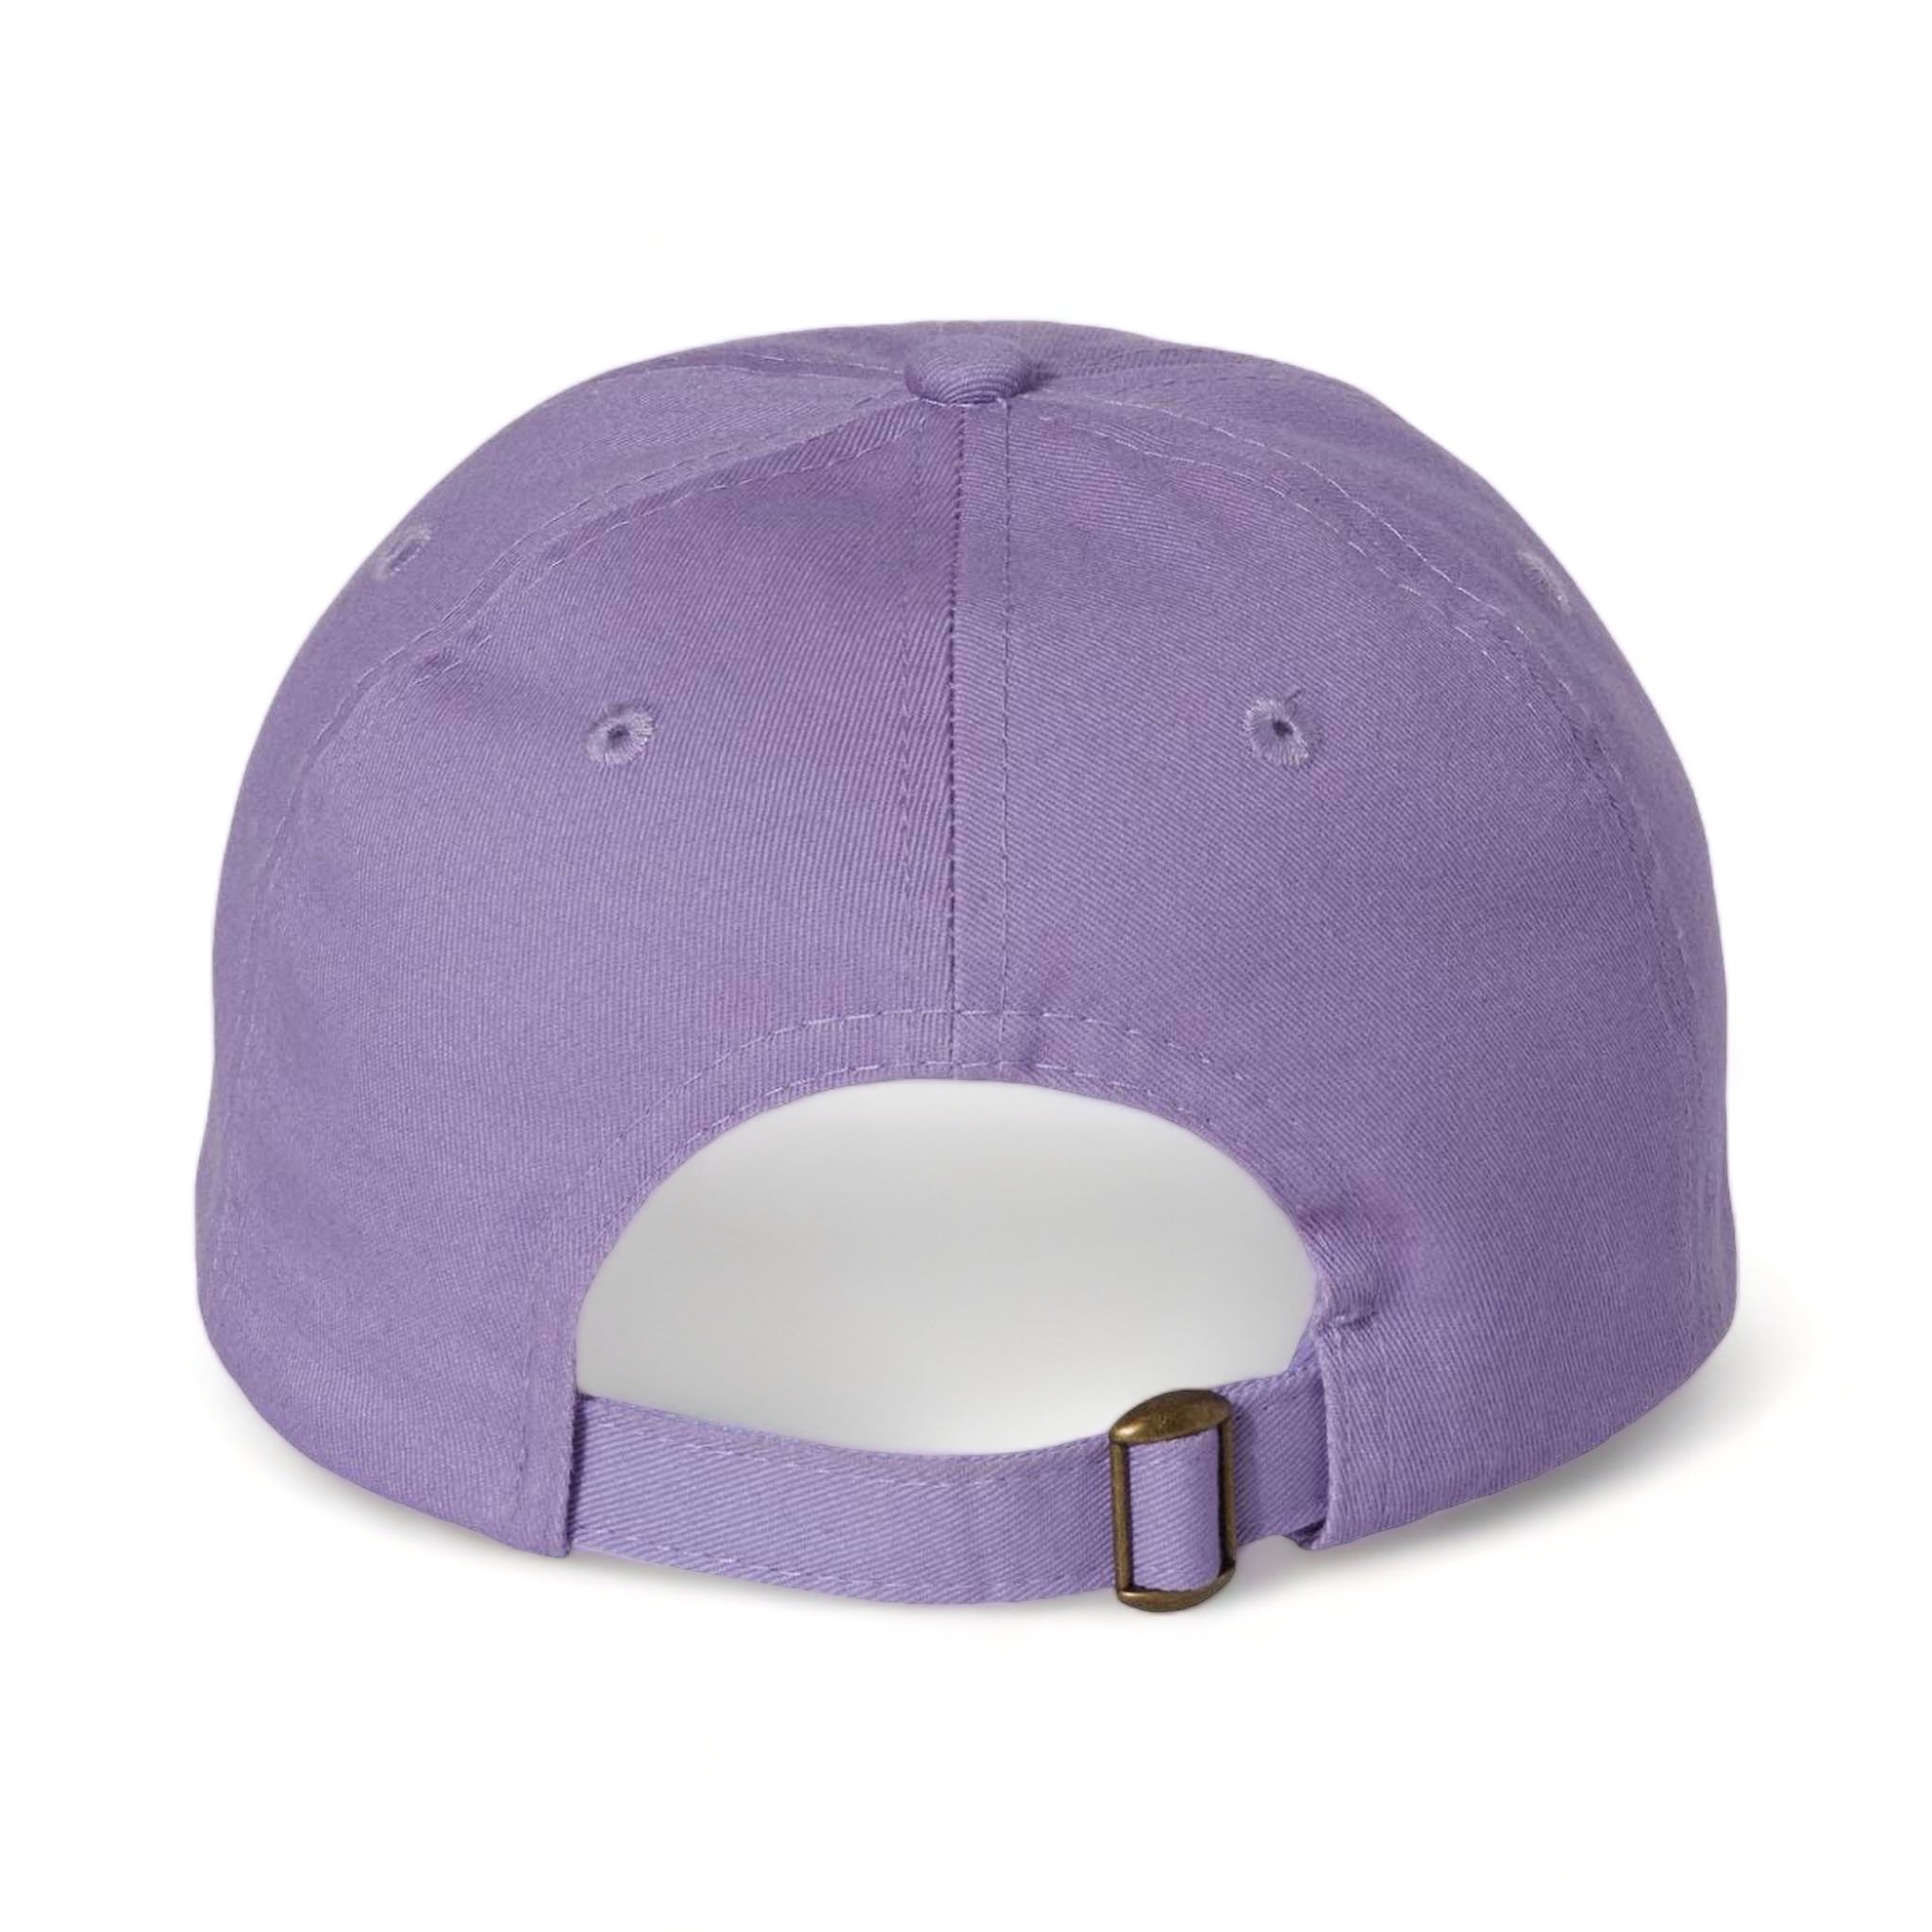 Back view of Valucap VC300A custom hat in lavender